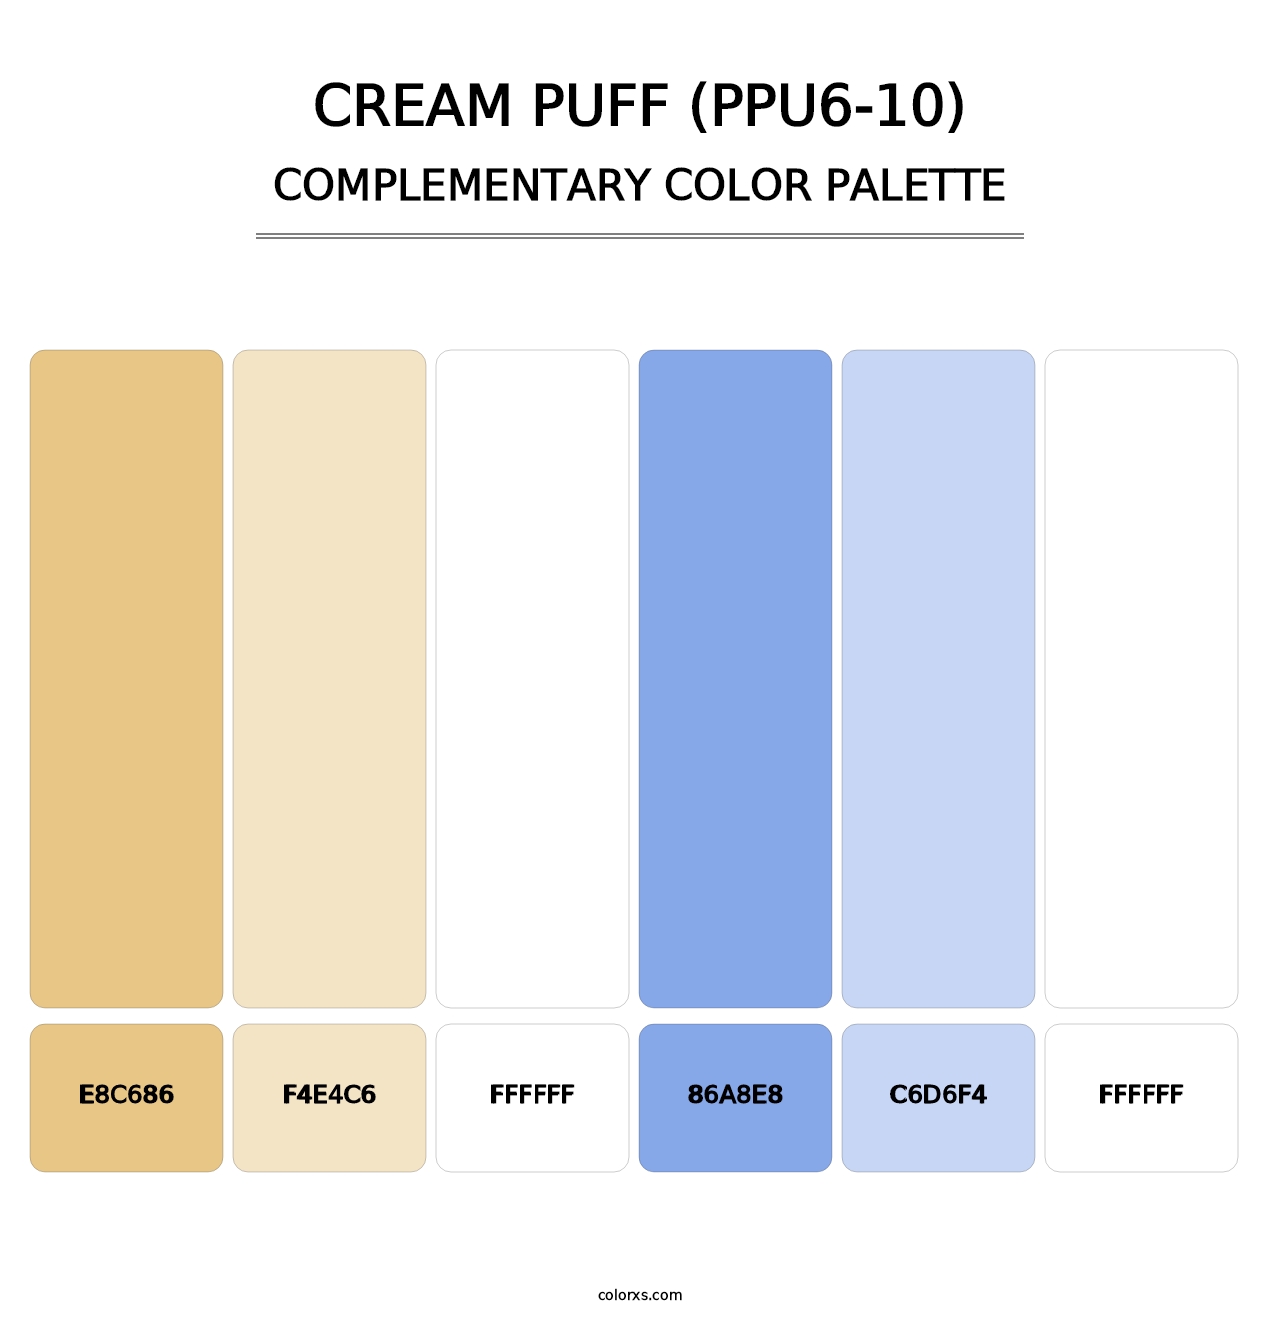 Cream Puff (PPU6-10) - Complementary Color Palette